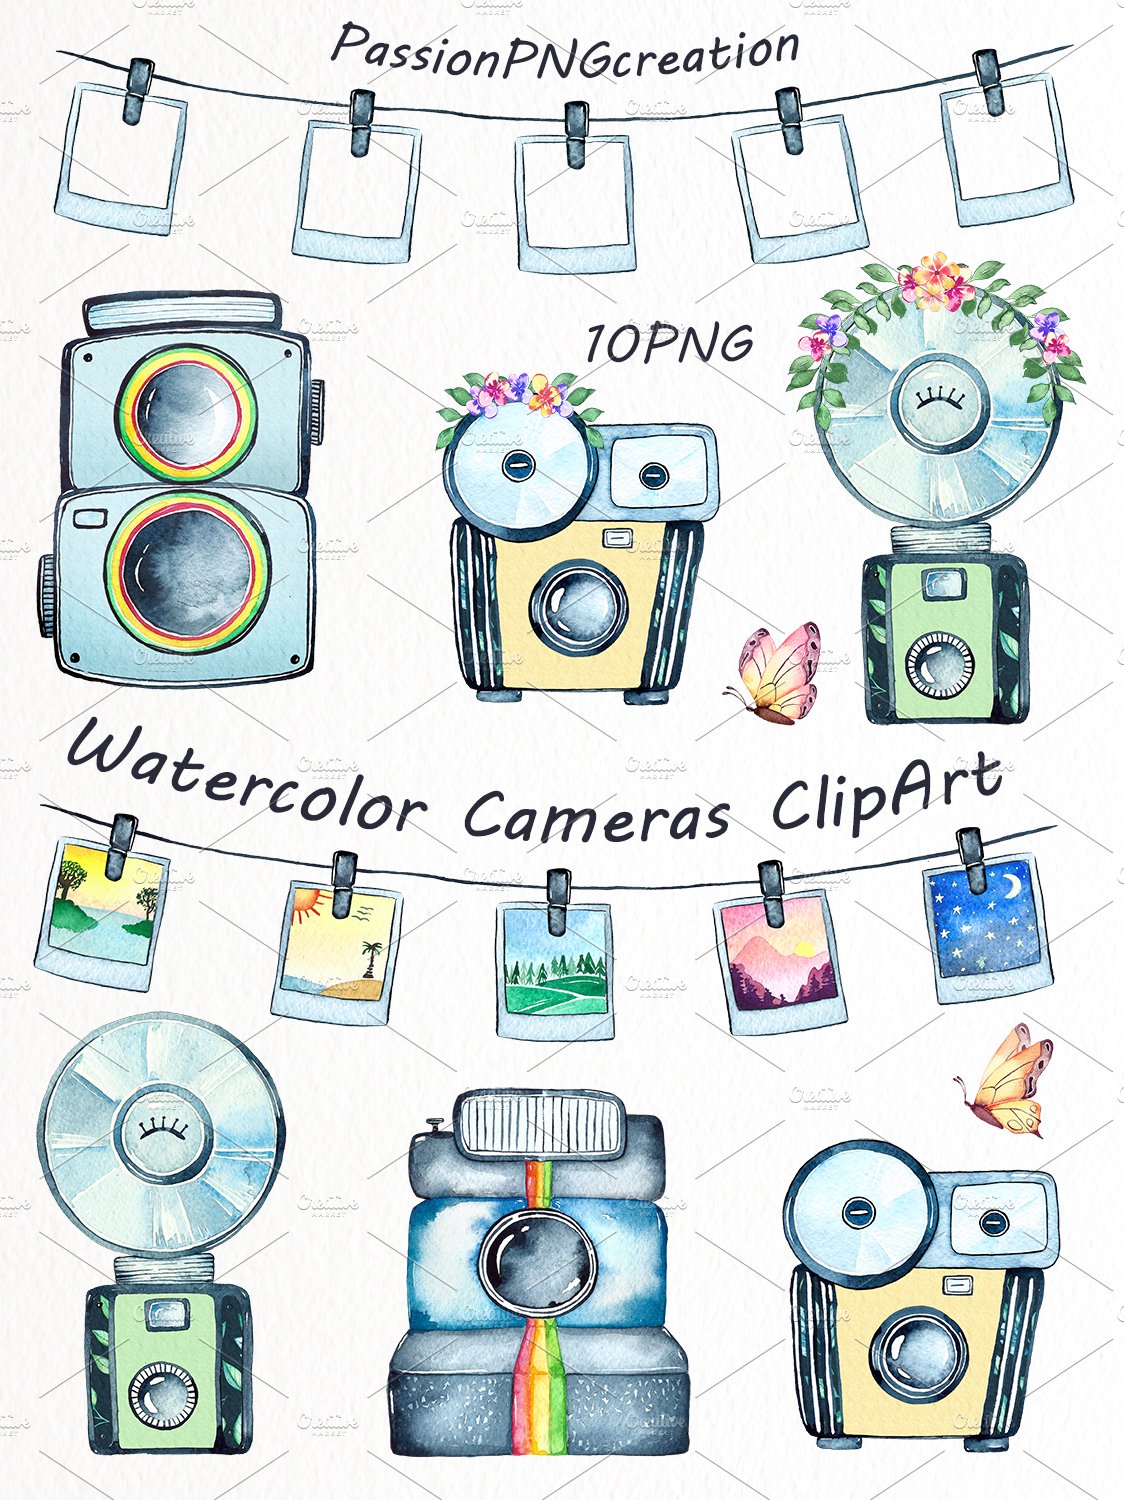 Watercolor Cameras Clipart preview image.